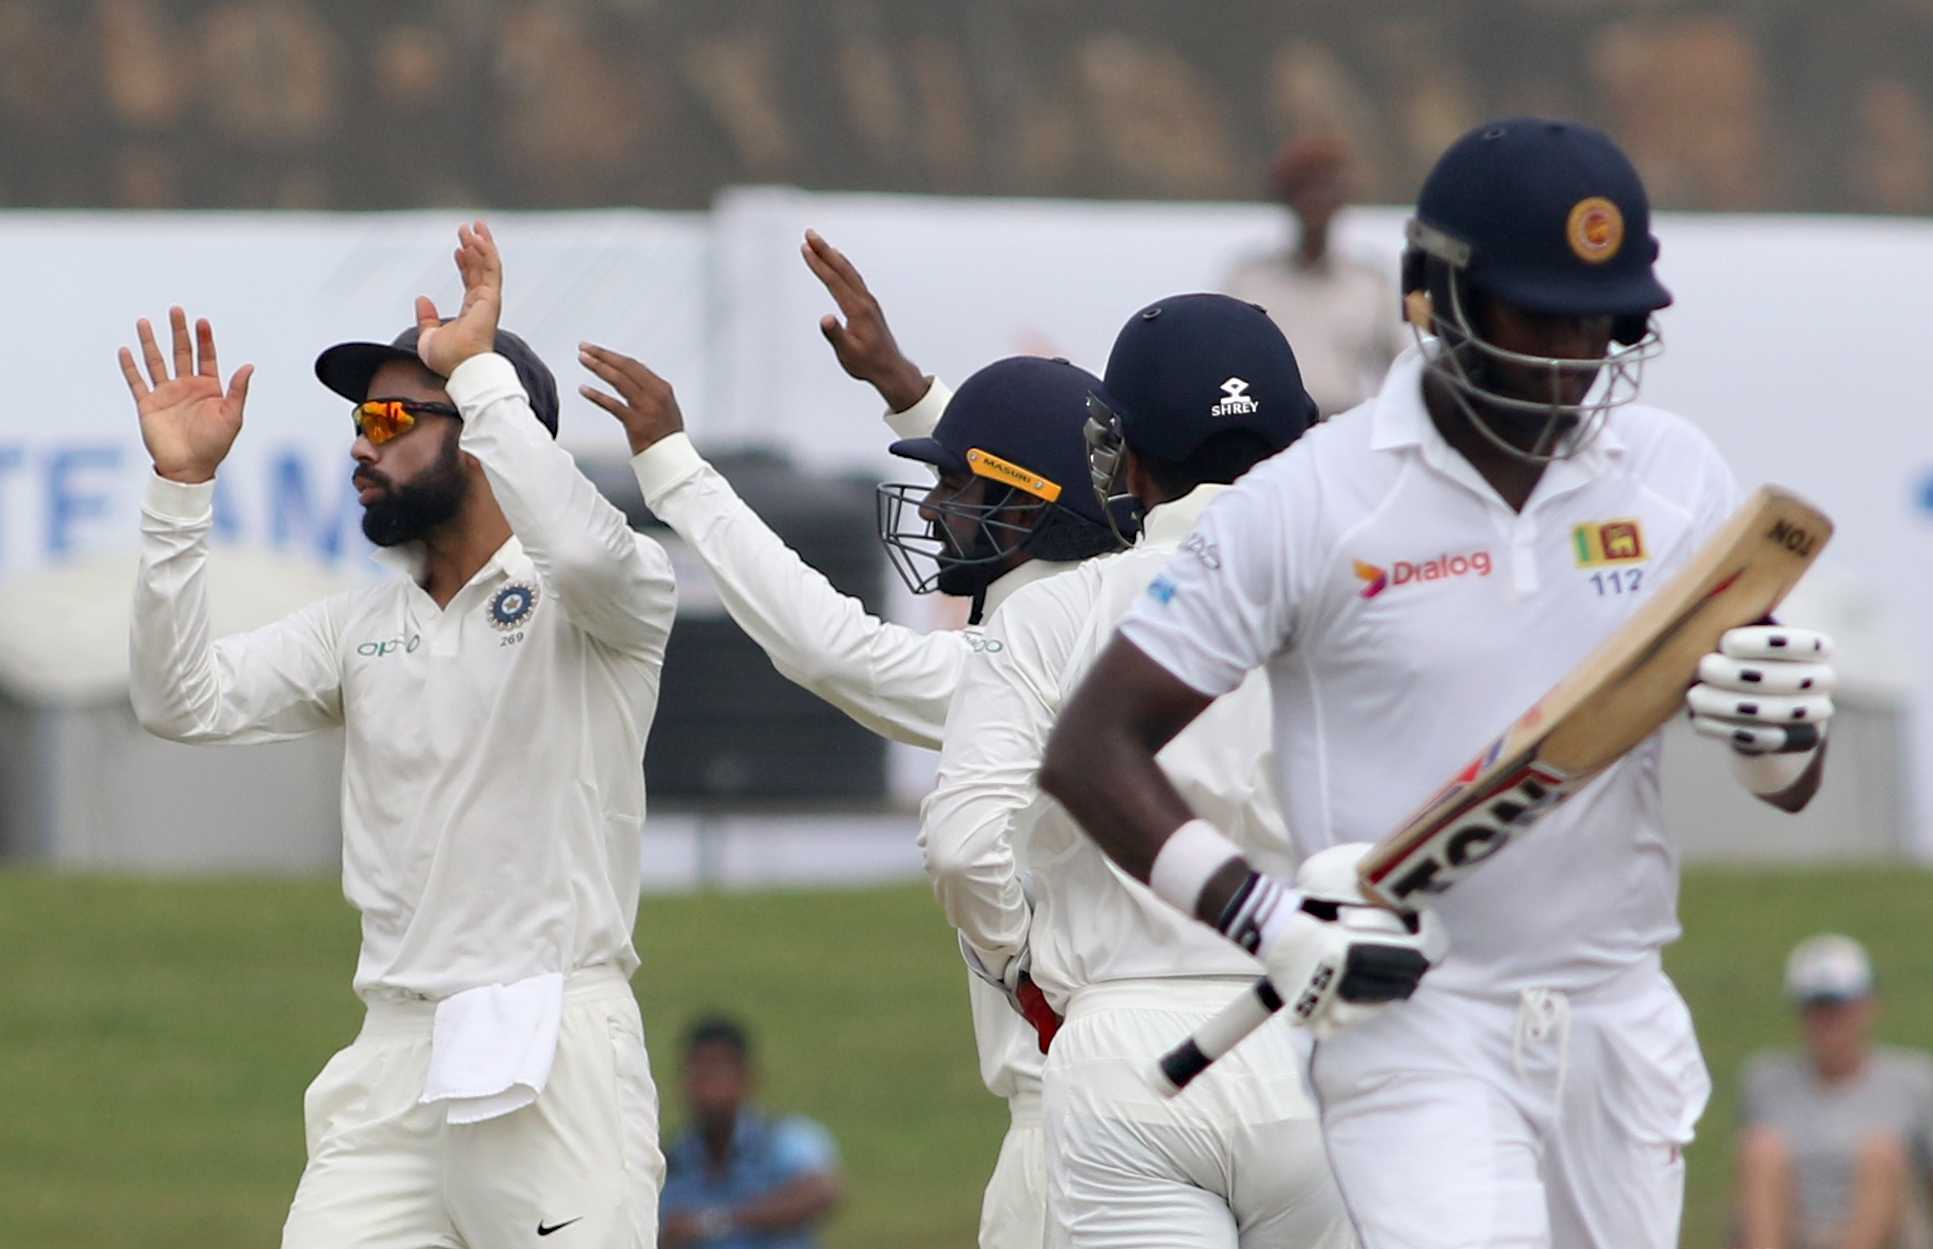 Indian National Cricket Team has put Sri Lanka in some serious trouble in first Test match